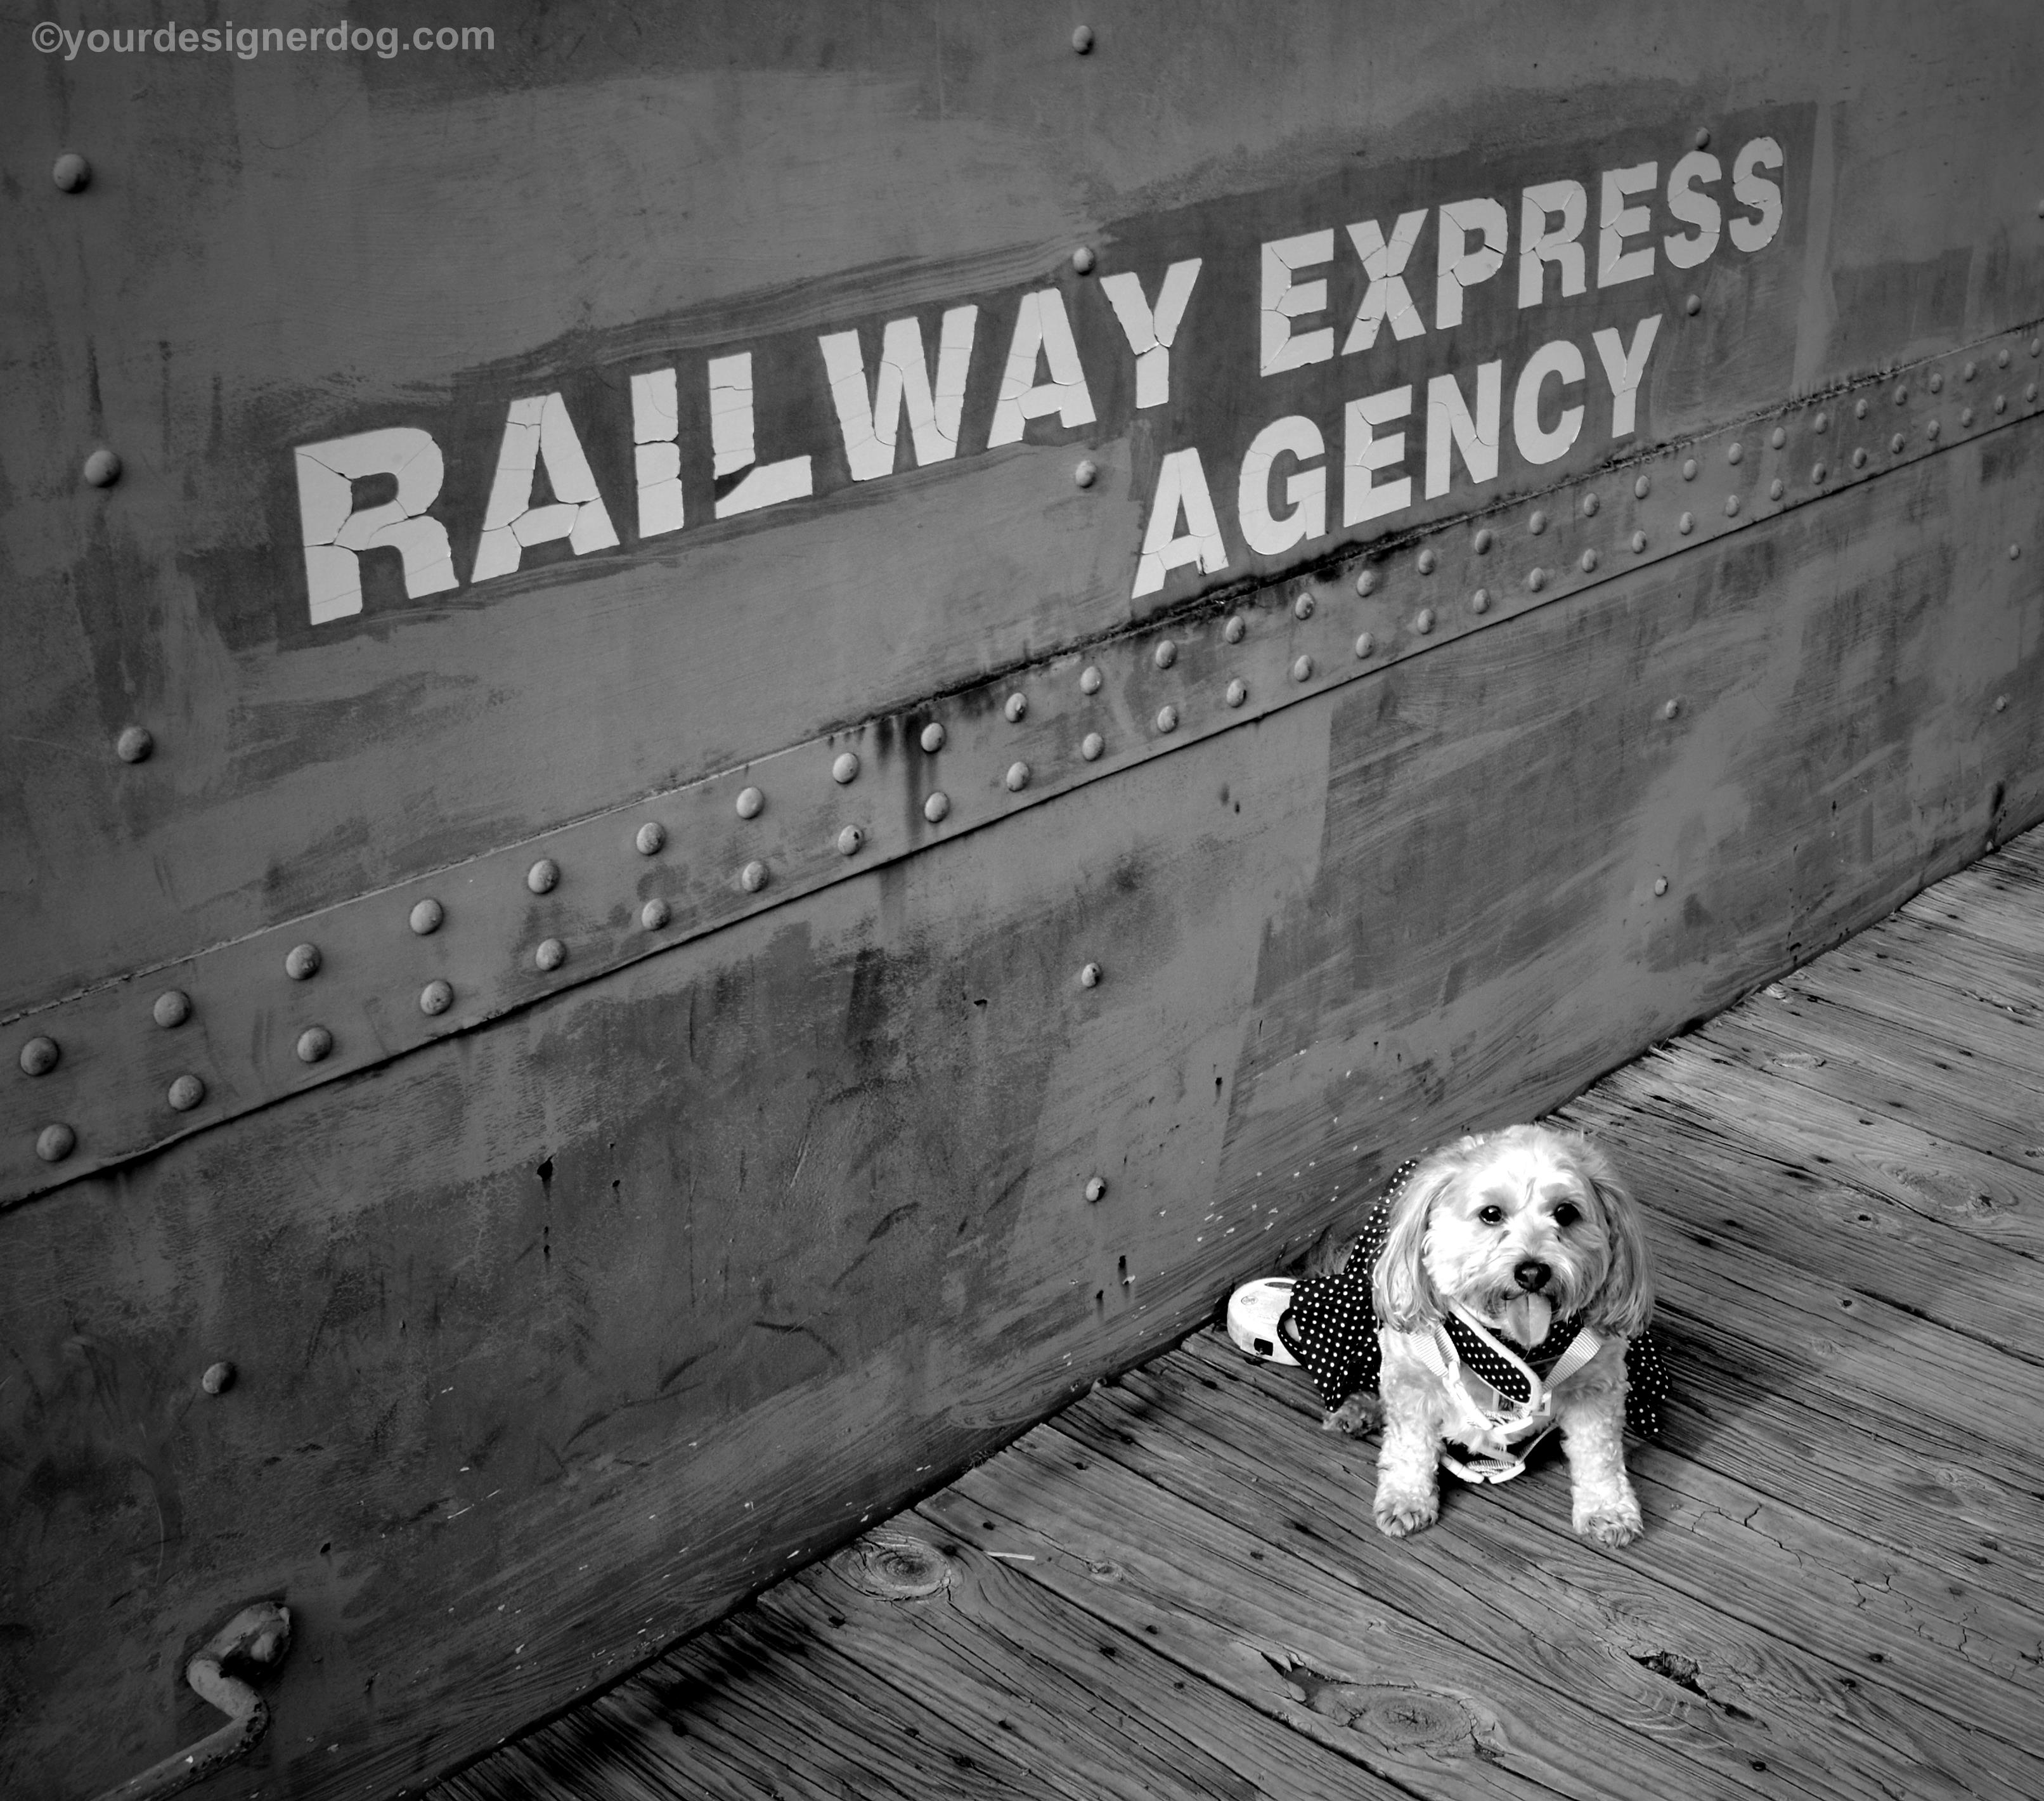 dogs, designer dogs, Yorkipoo, yorkie poo, railroad, train, black and white photography